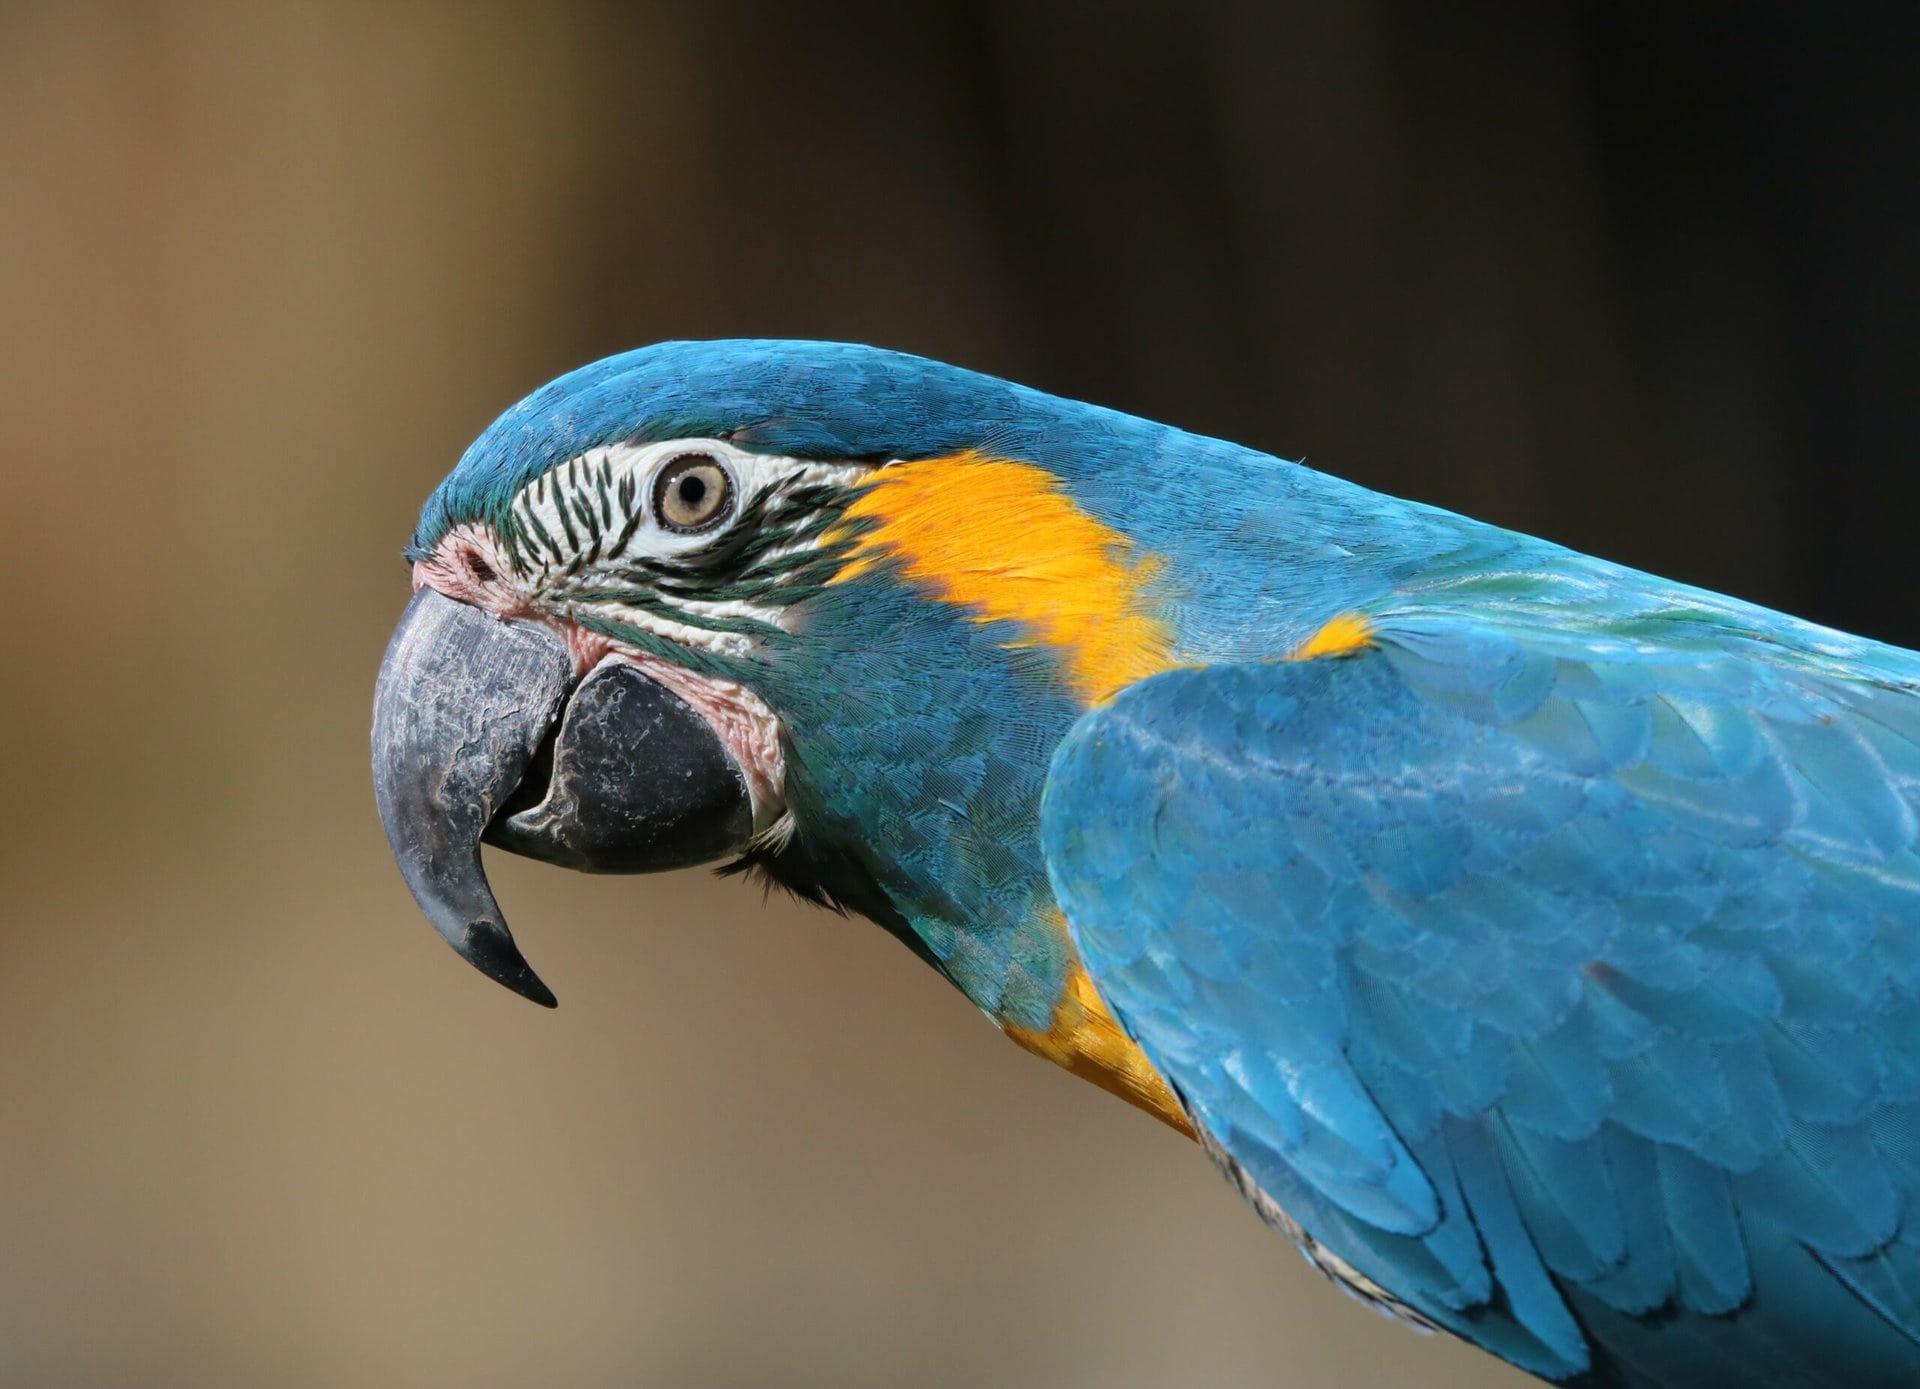 Blue-throated Macaw at African Lion Safari